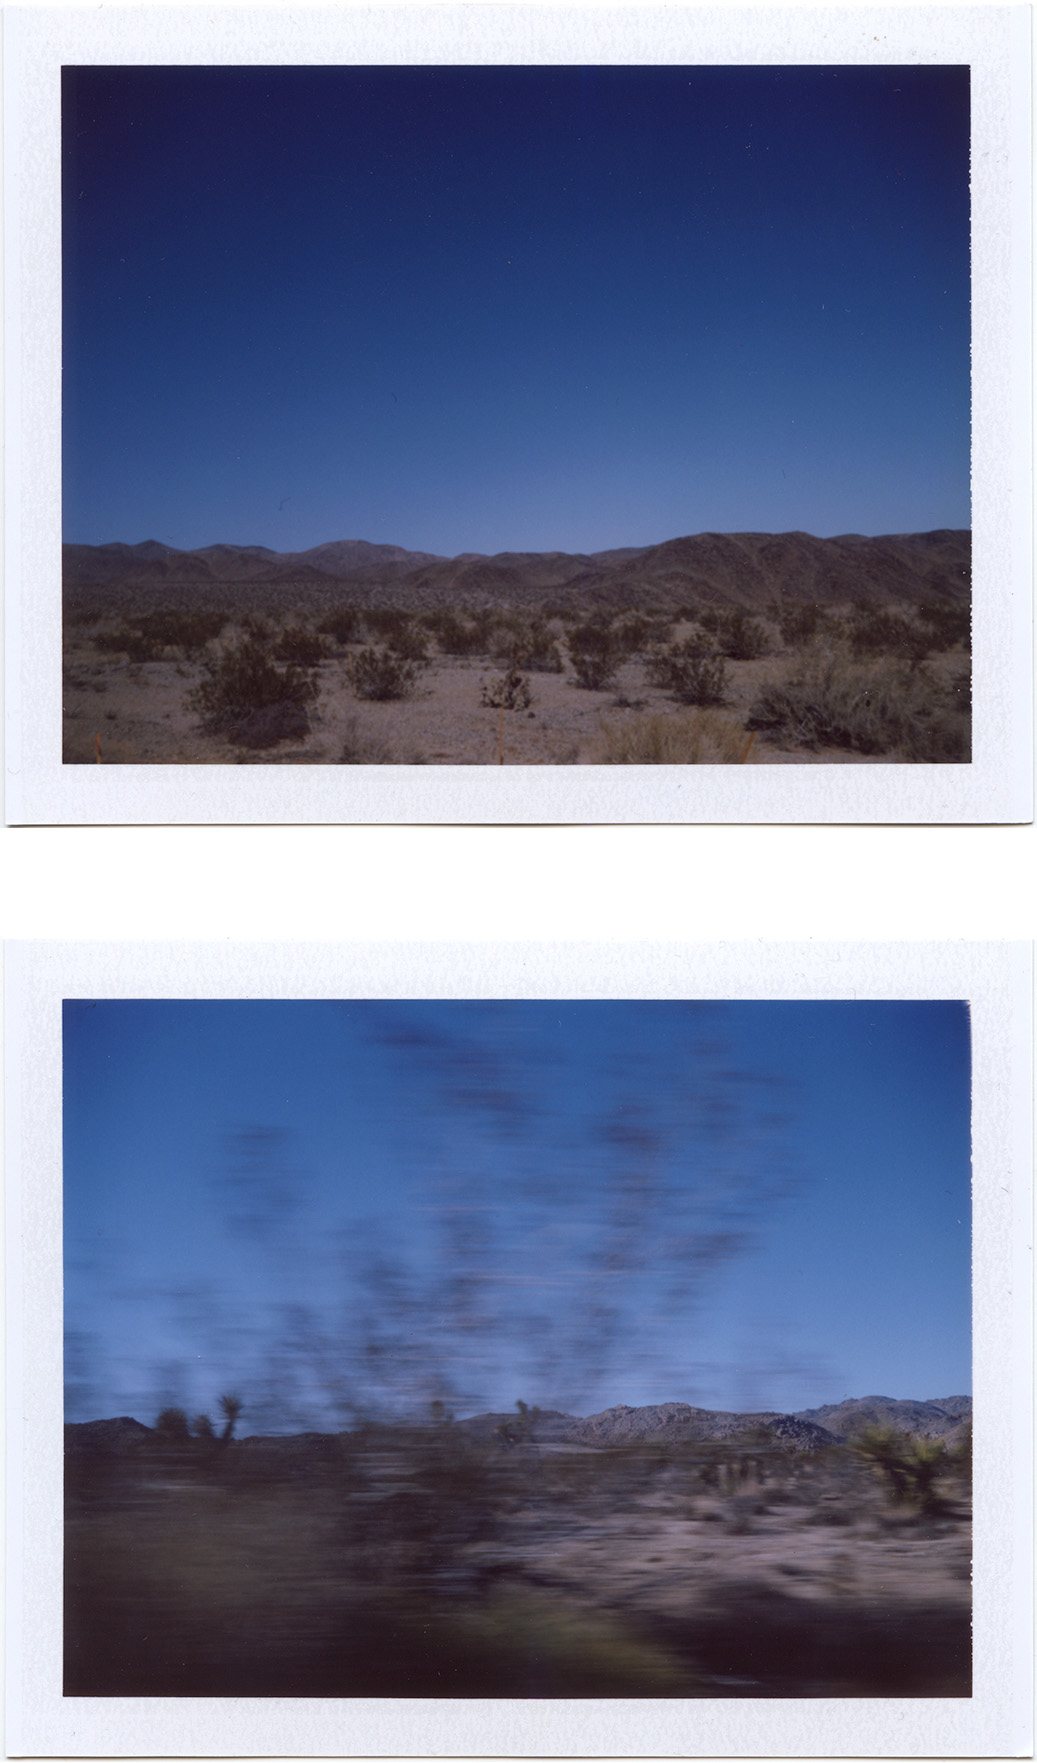  Joshua Tree National Park, California / 2013   Excerpts from the book  "Fragments"    Signed Copies   On Demand @Blurb   Online Shop  